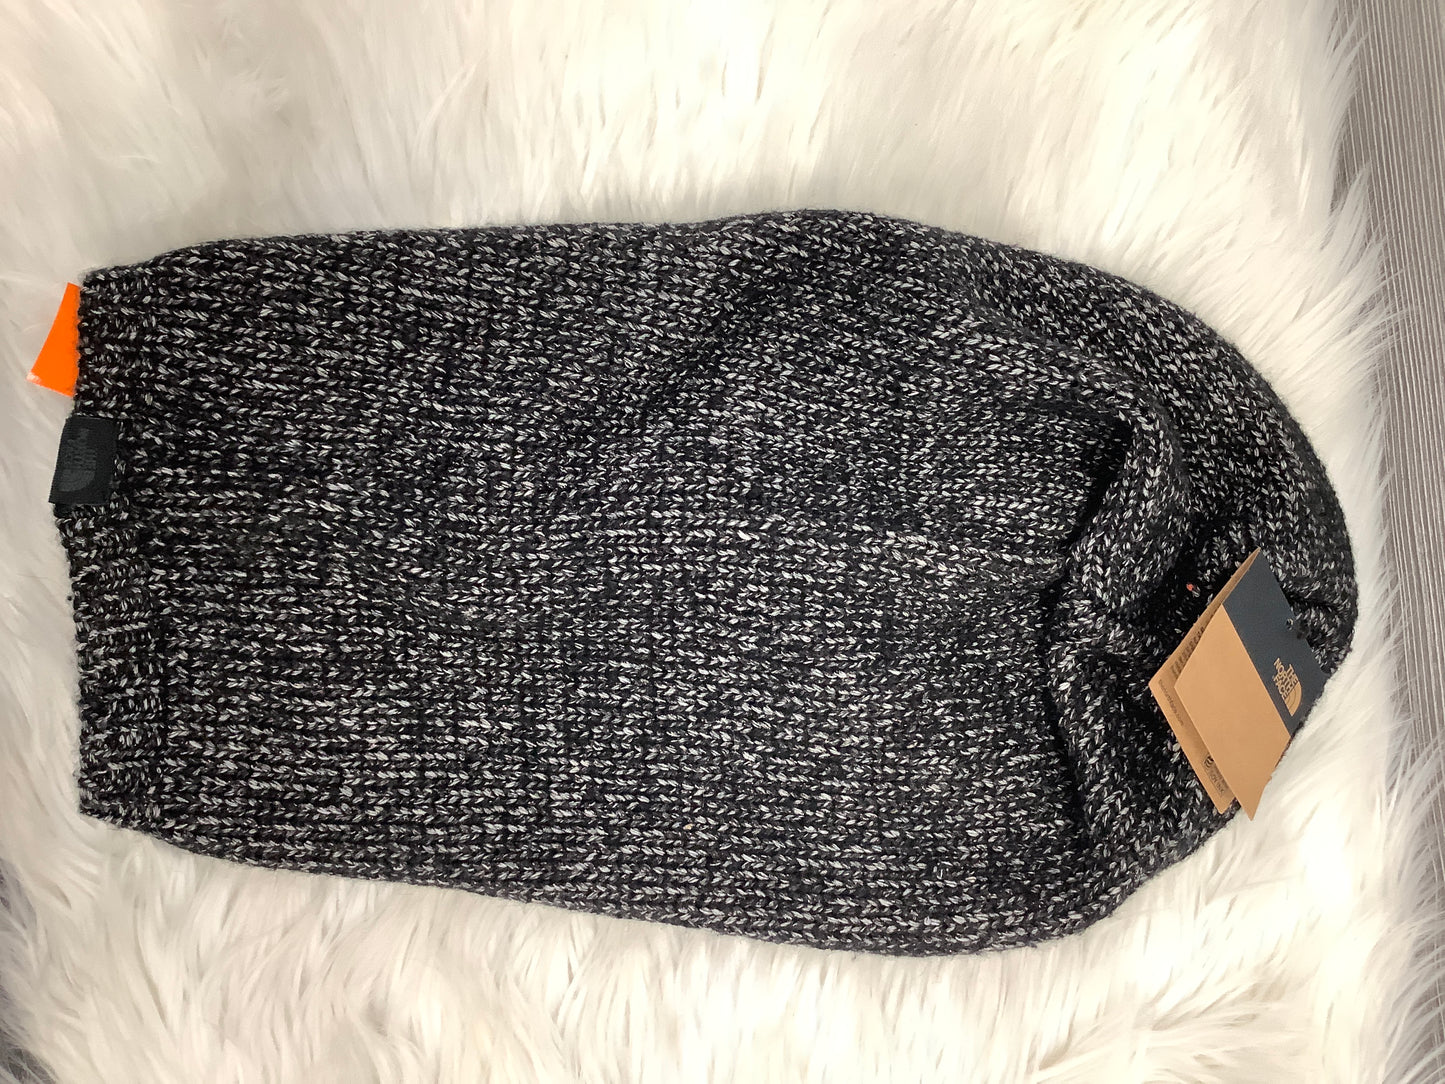 Hat Beanie By North Face